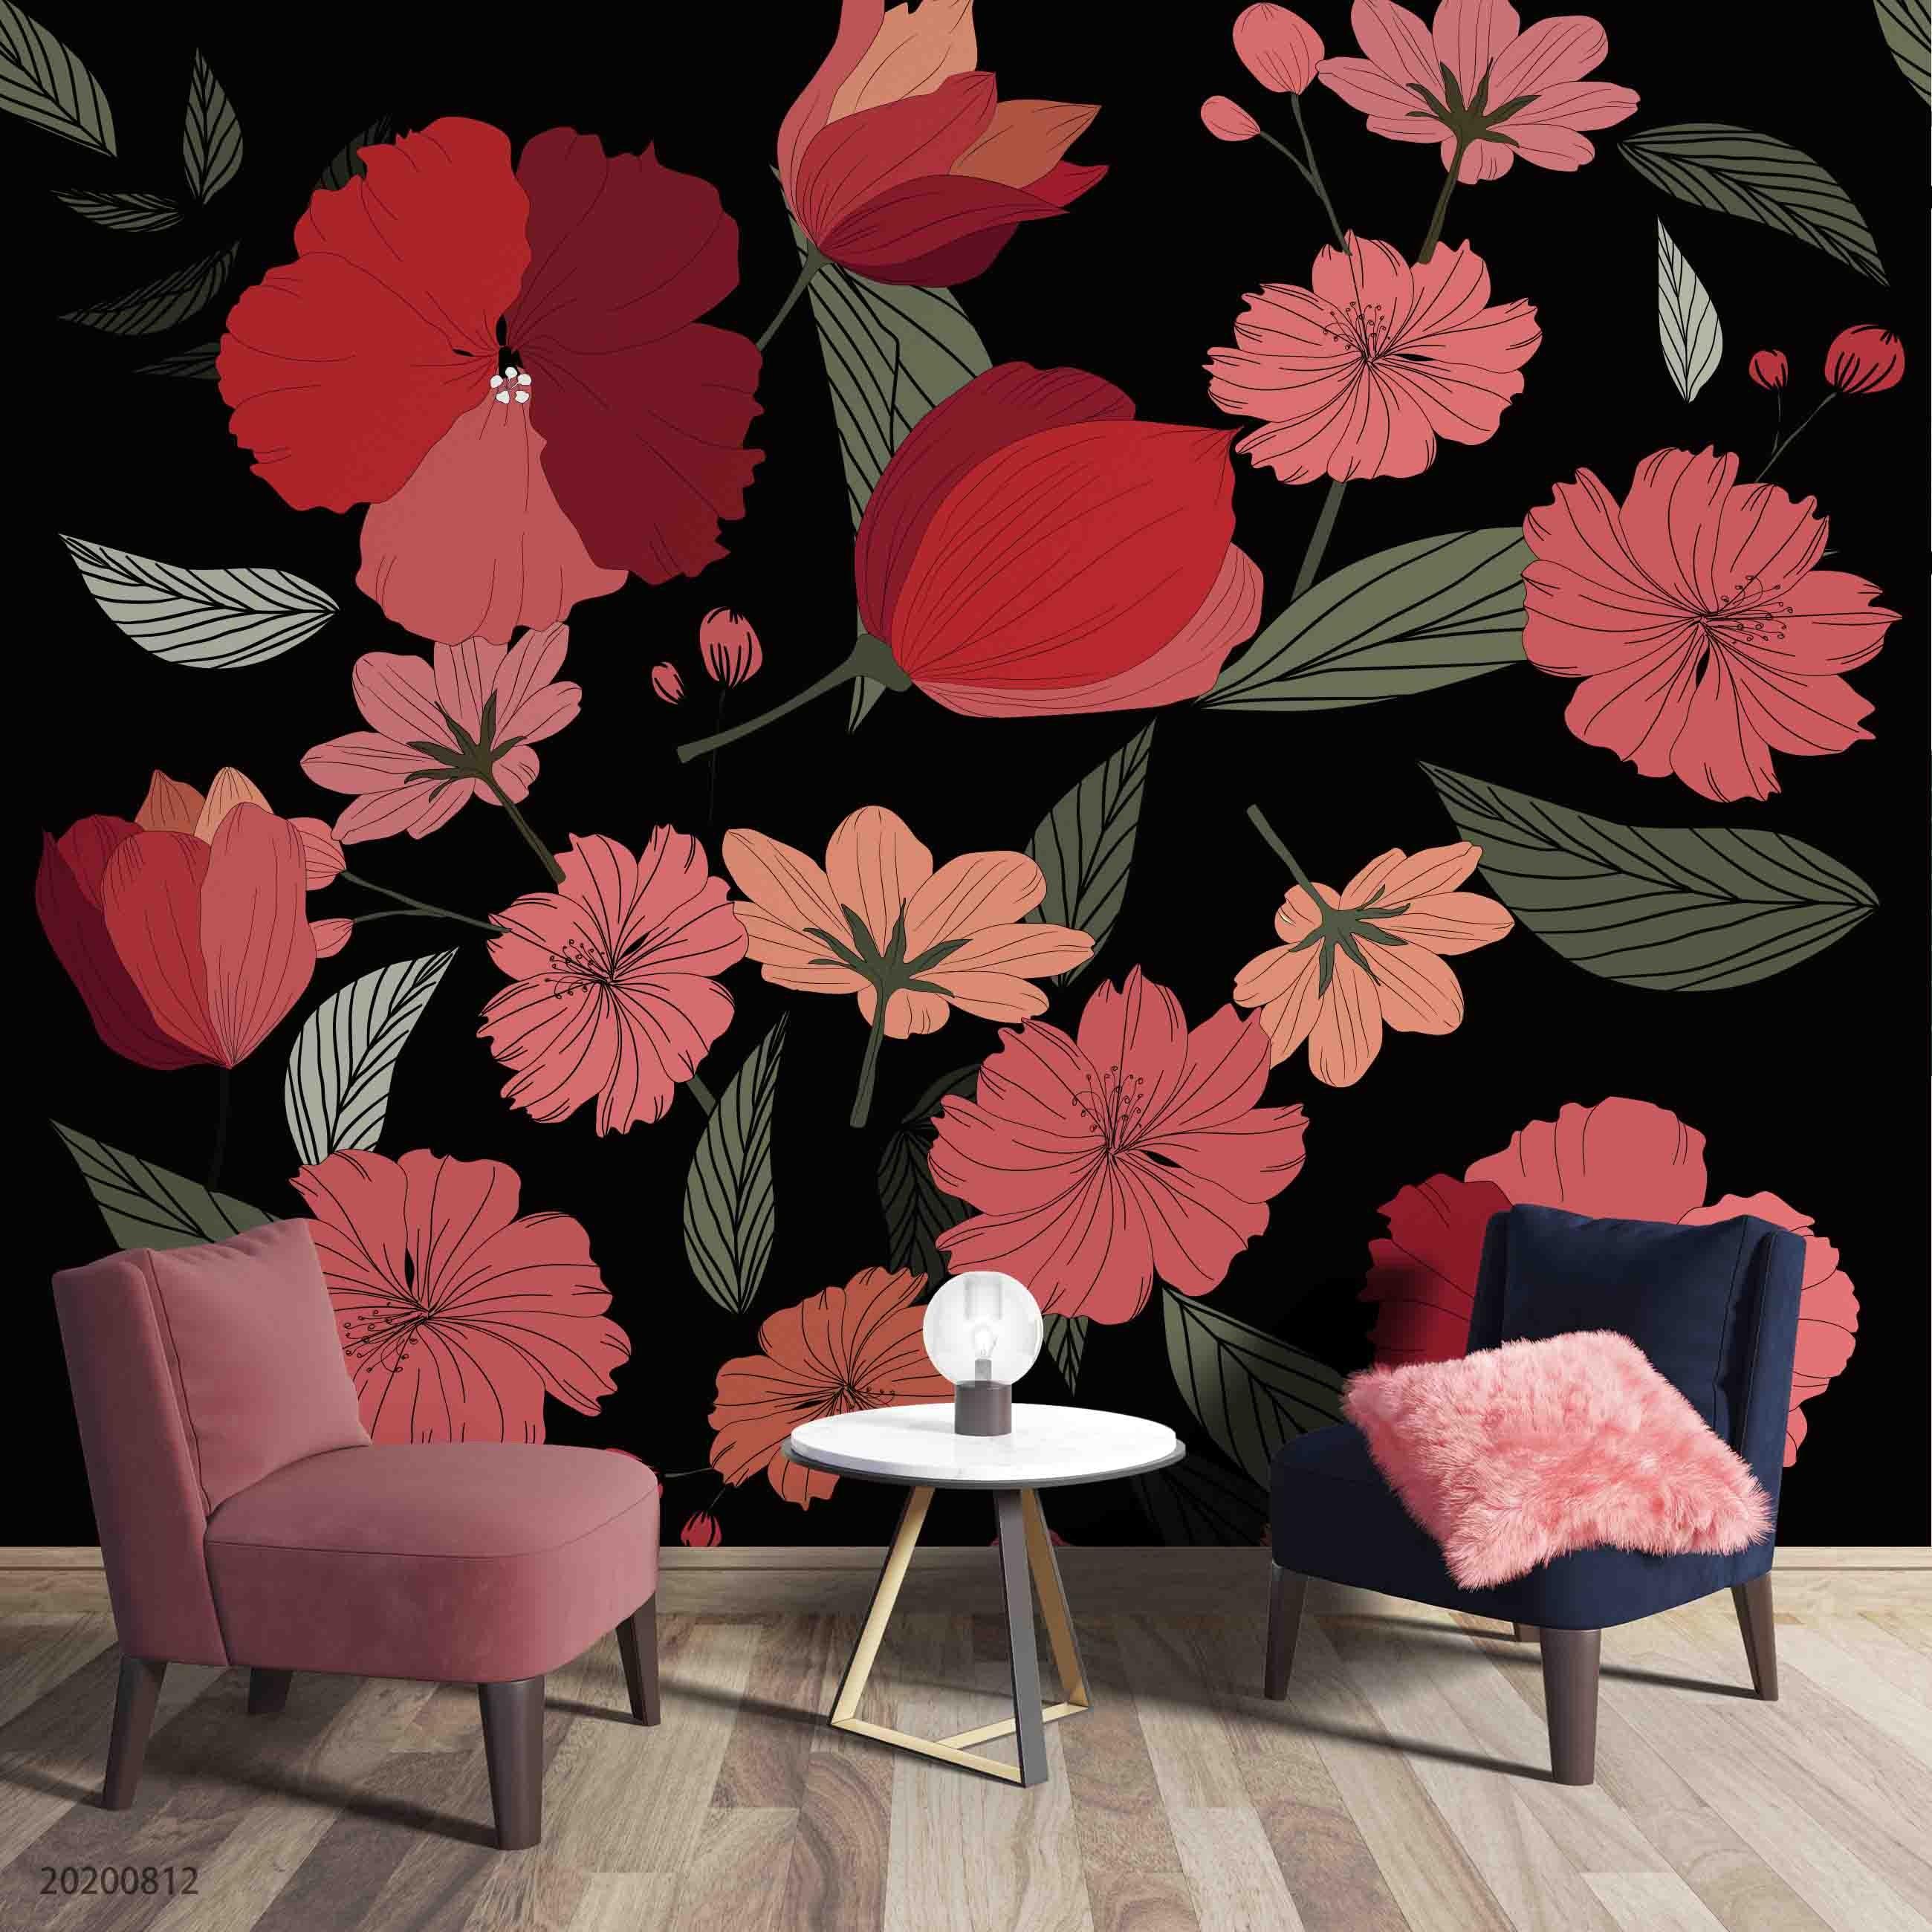 3D Hand Sketching Pink Floral Leaves Plant Wall Mural Wallpaper LXL 1075- Jess Art Decoration